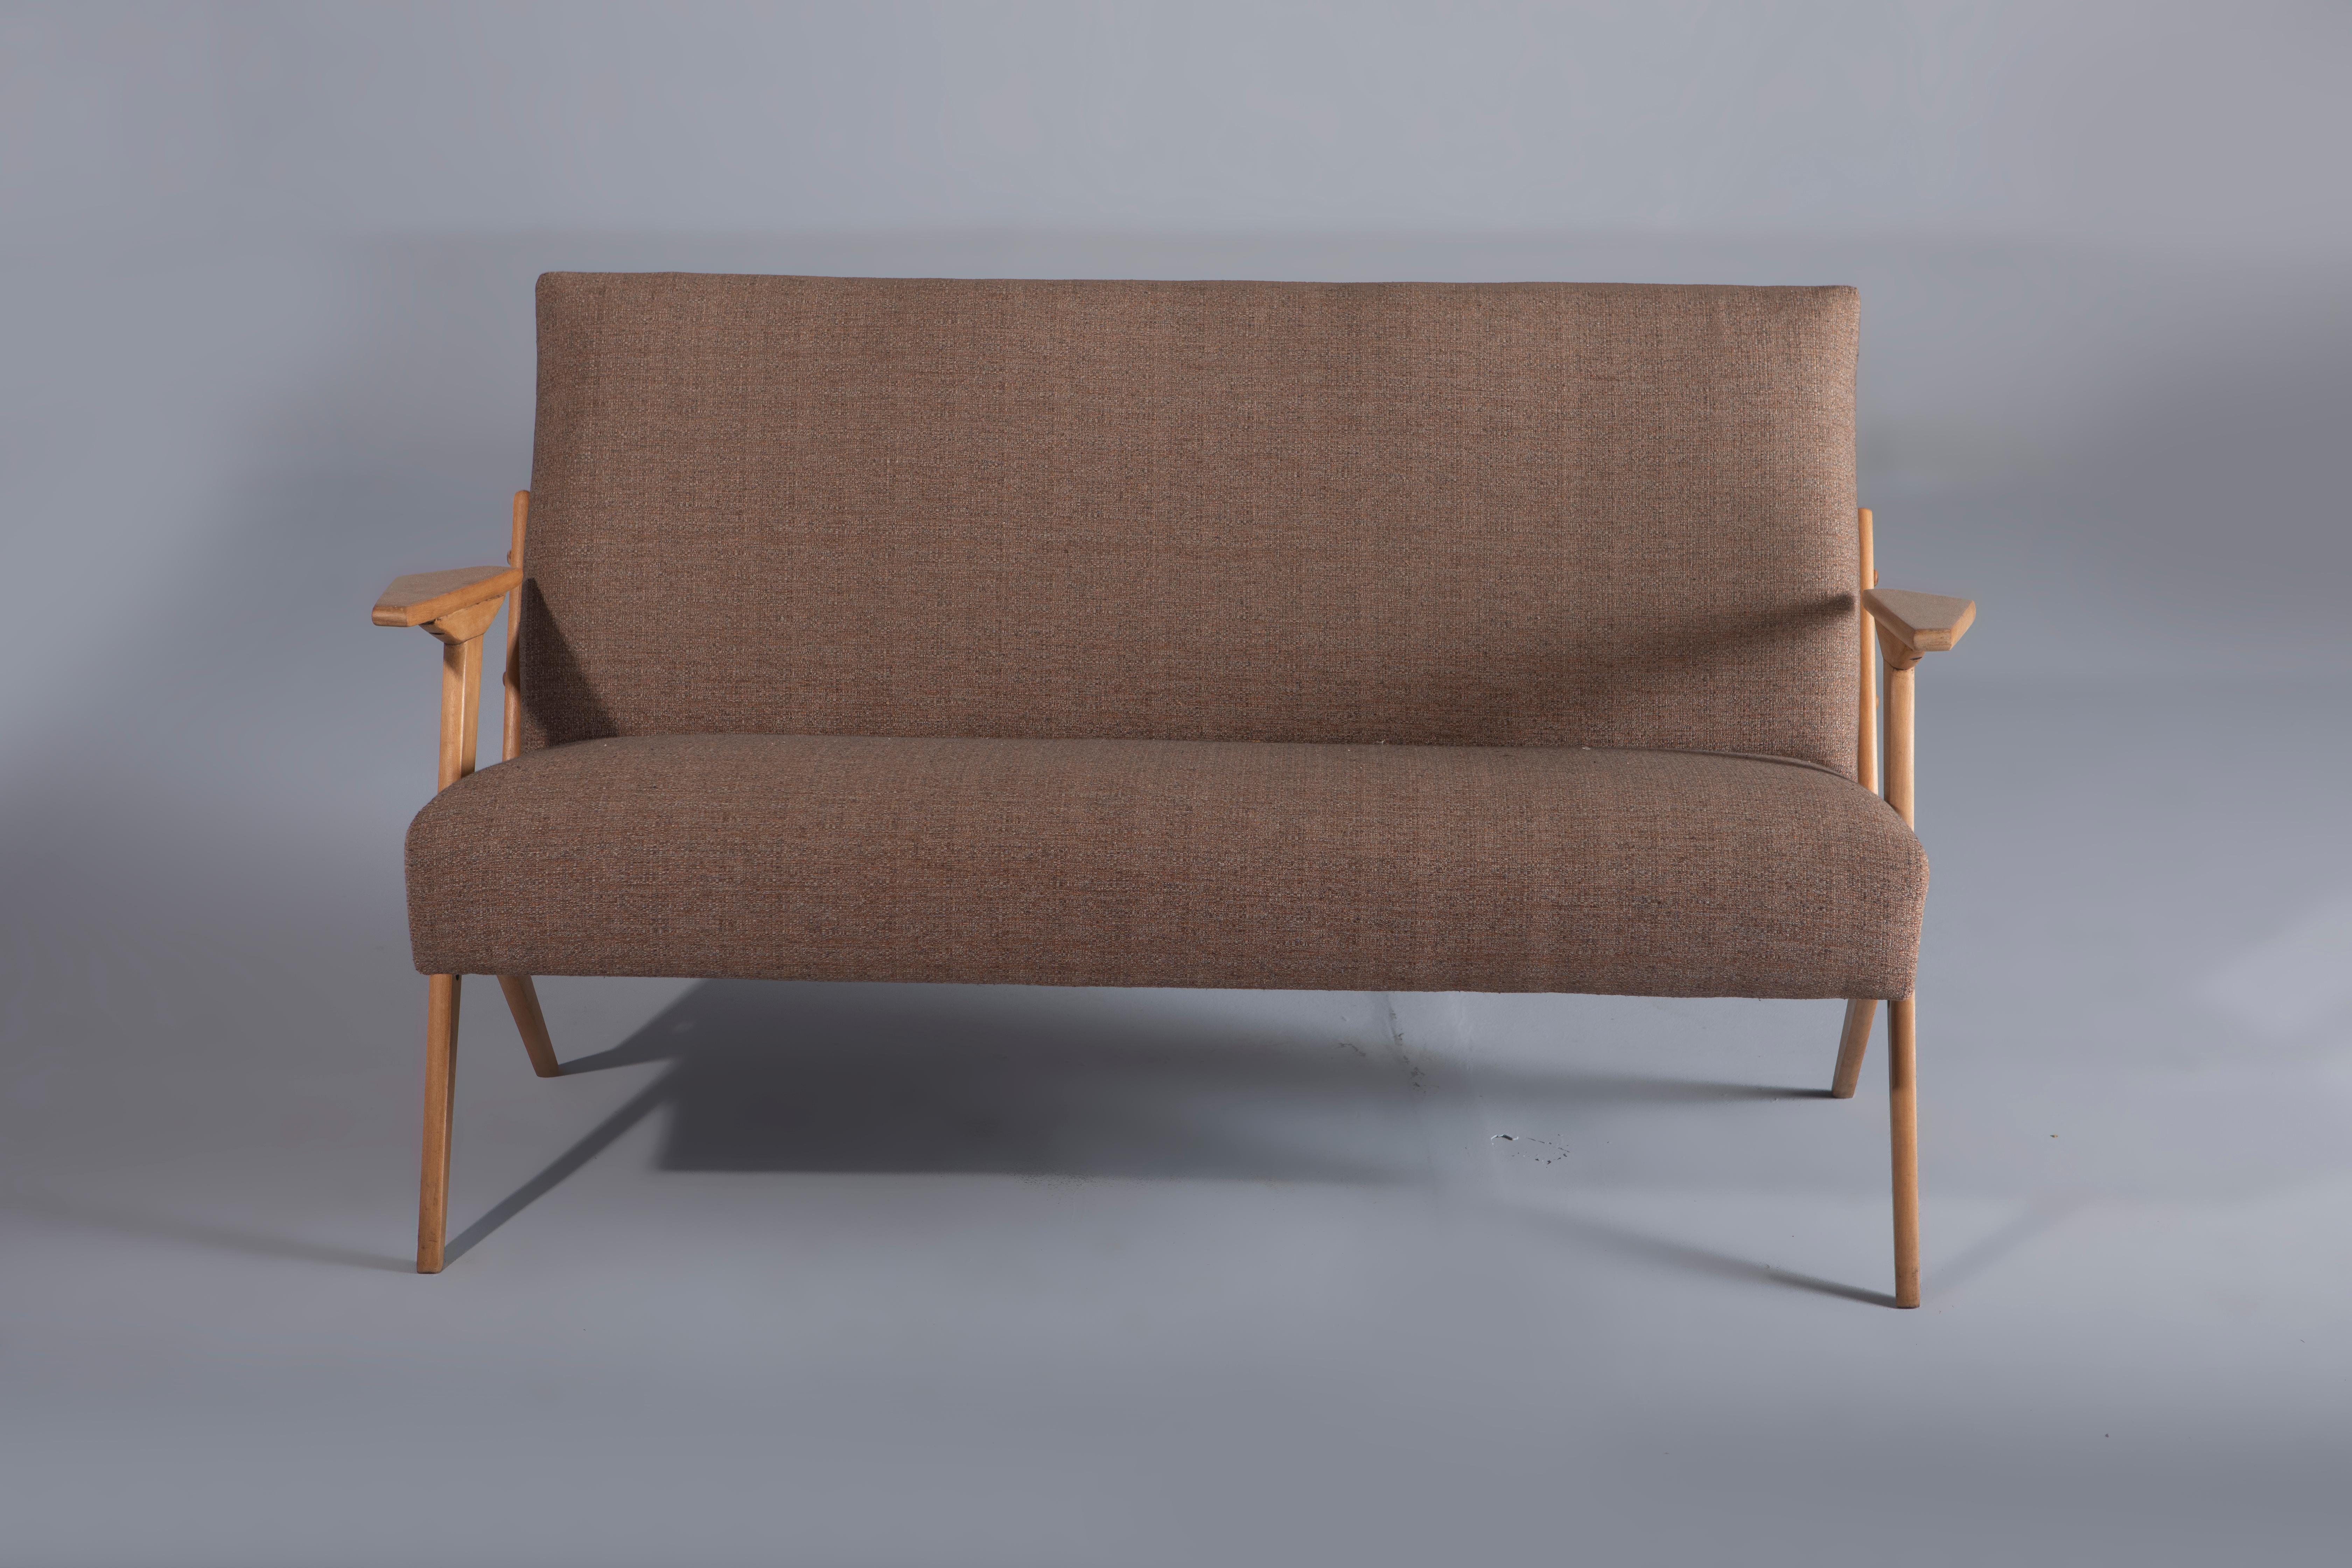 Mid-Century Modern 'Linha Z' Lounge Sofa by José Zanine Caldas, Brazil, 1950s

This 'Linha Z' sofa, made of solid wood structure, and upholstered with fabric, stands out with its architectural silhouette, reminiscent of the letter 'Z.' 
The